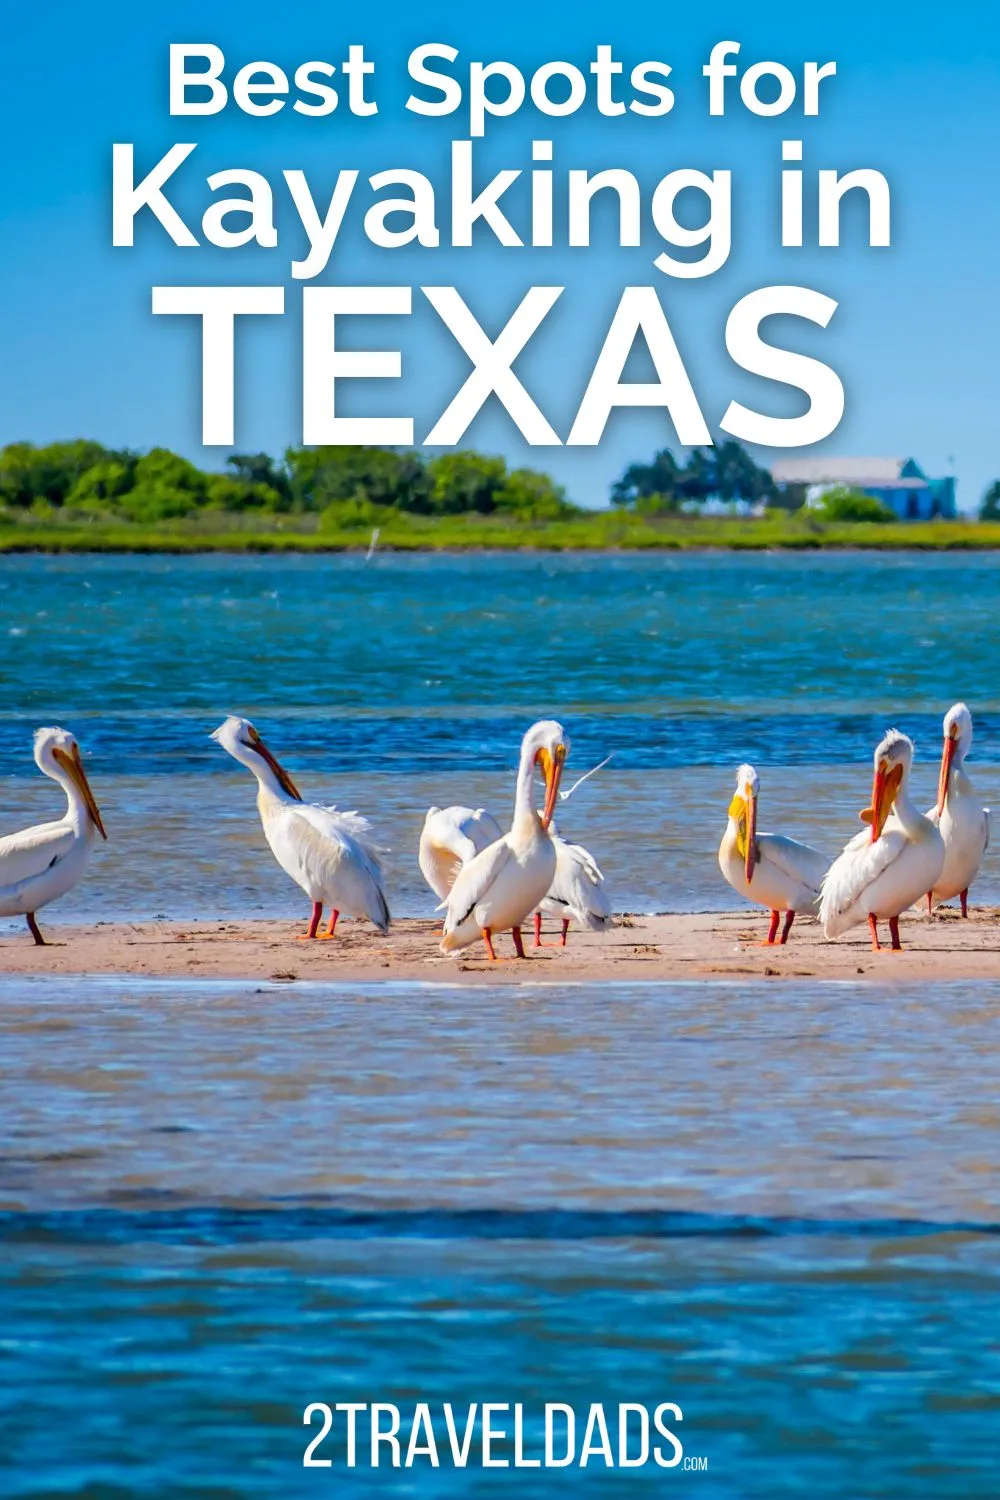 Kayaking in Texas is very surprising and interesting. From paddling through cities to exploring the Gulf Coast and Rio Grande. Tips for planning kayaking around Texas.